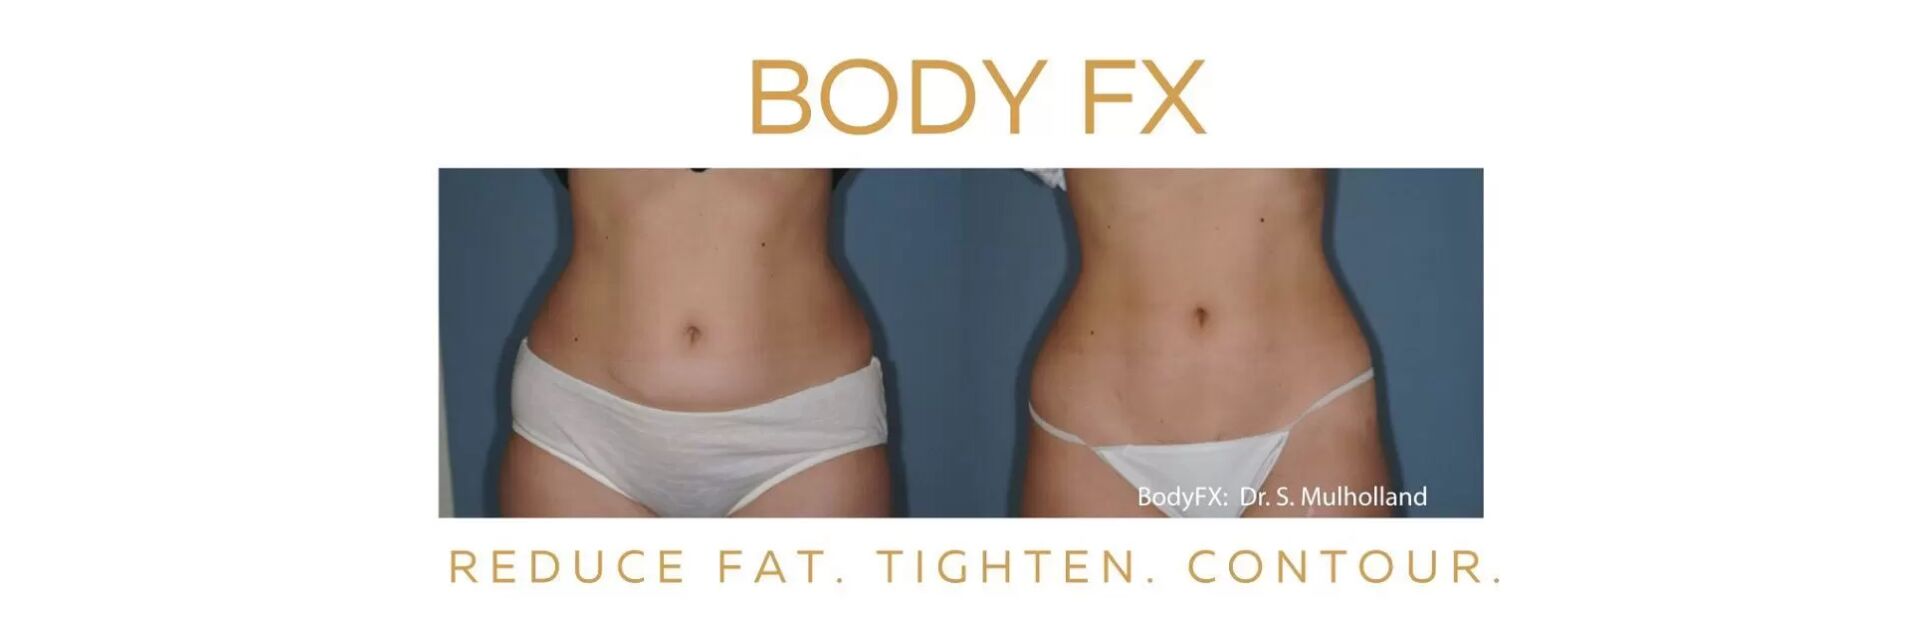 Body FX richmond bc before and after